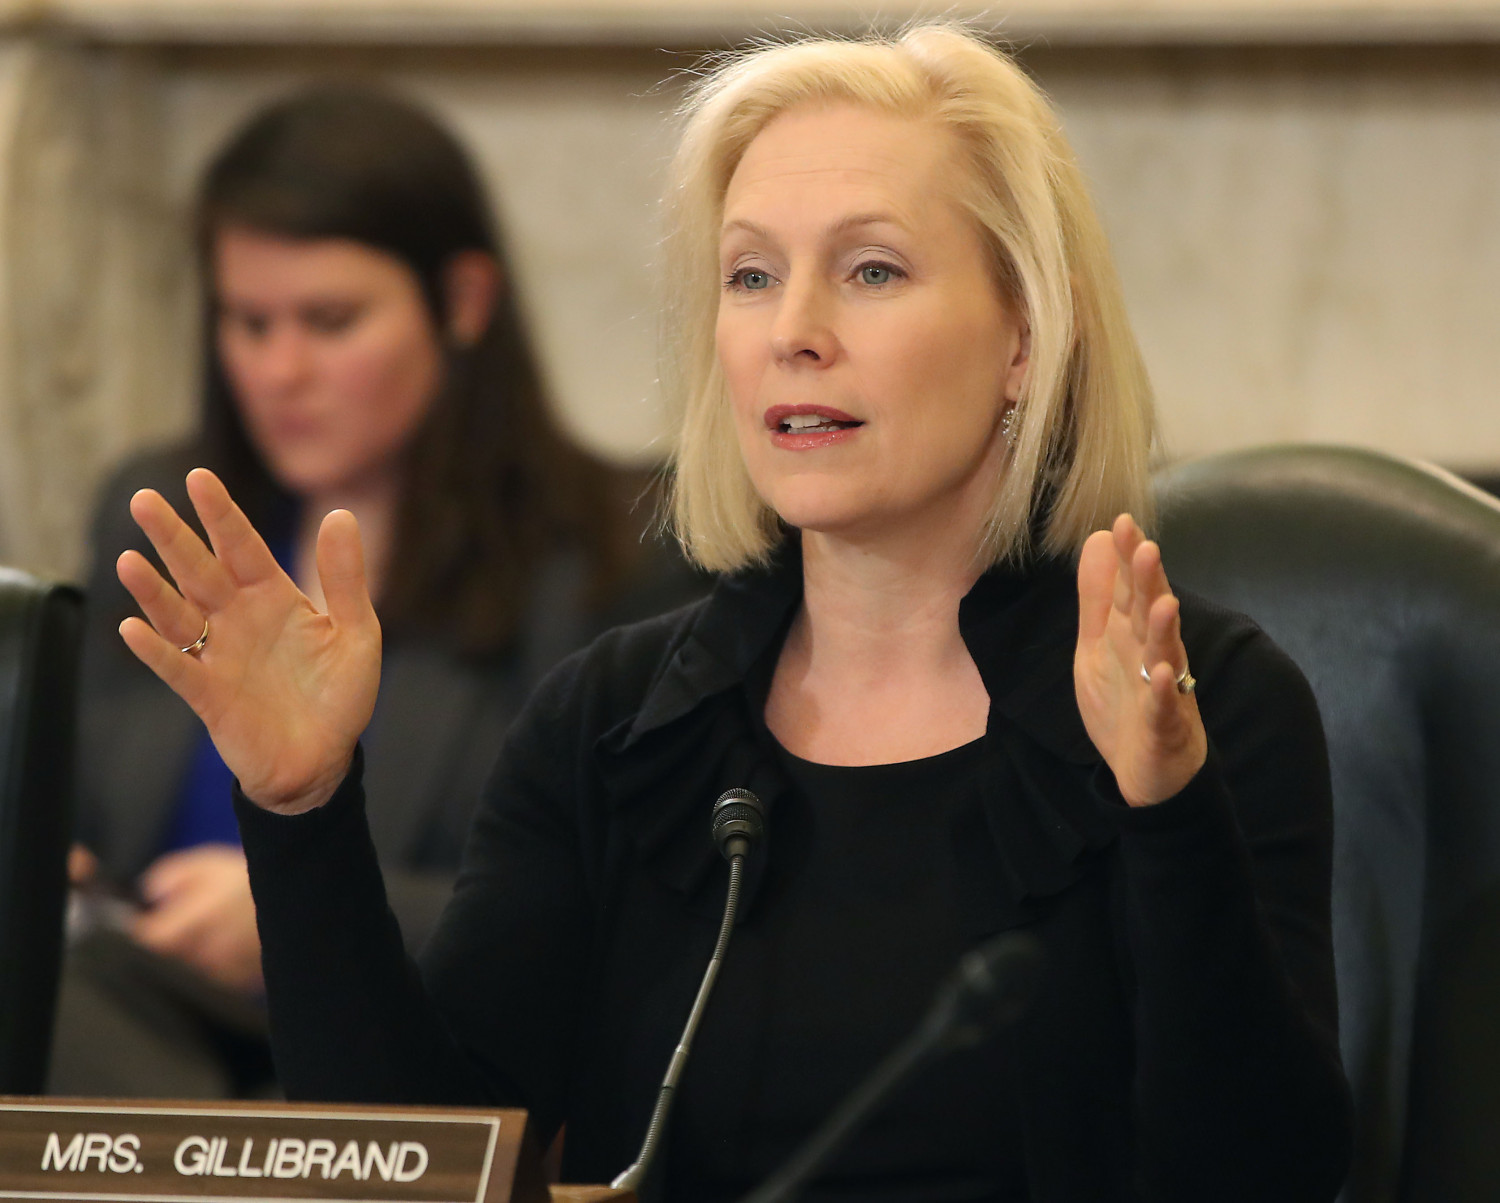 Gillibrand Joins the List of Democrats That Support Mandatory Buyback of Assault Weapons